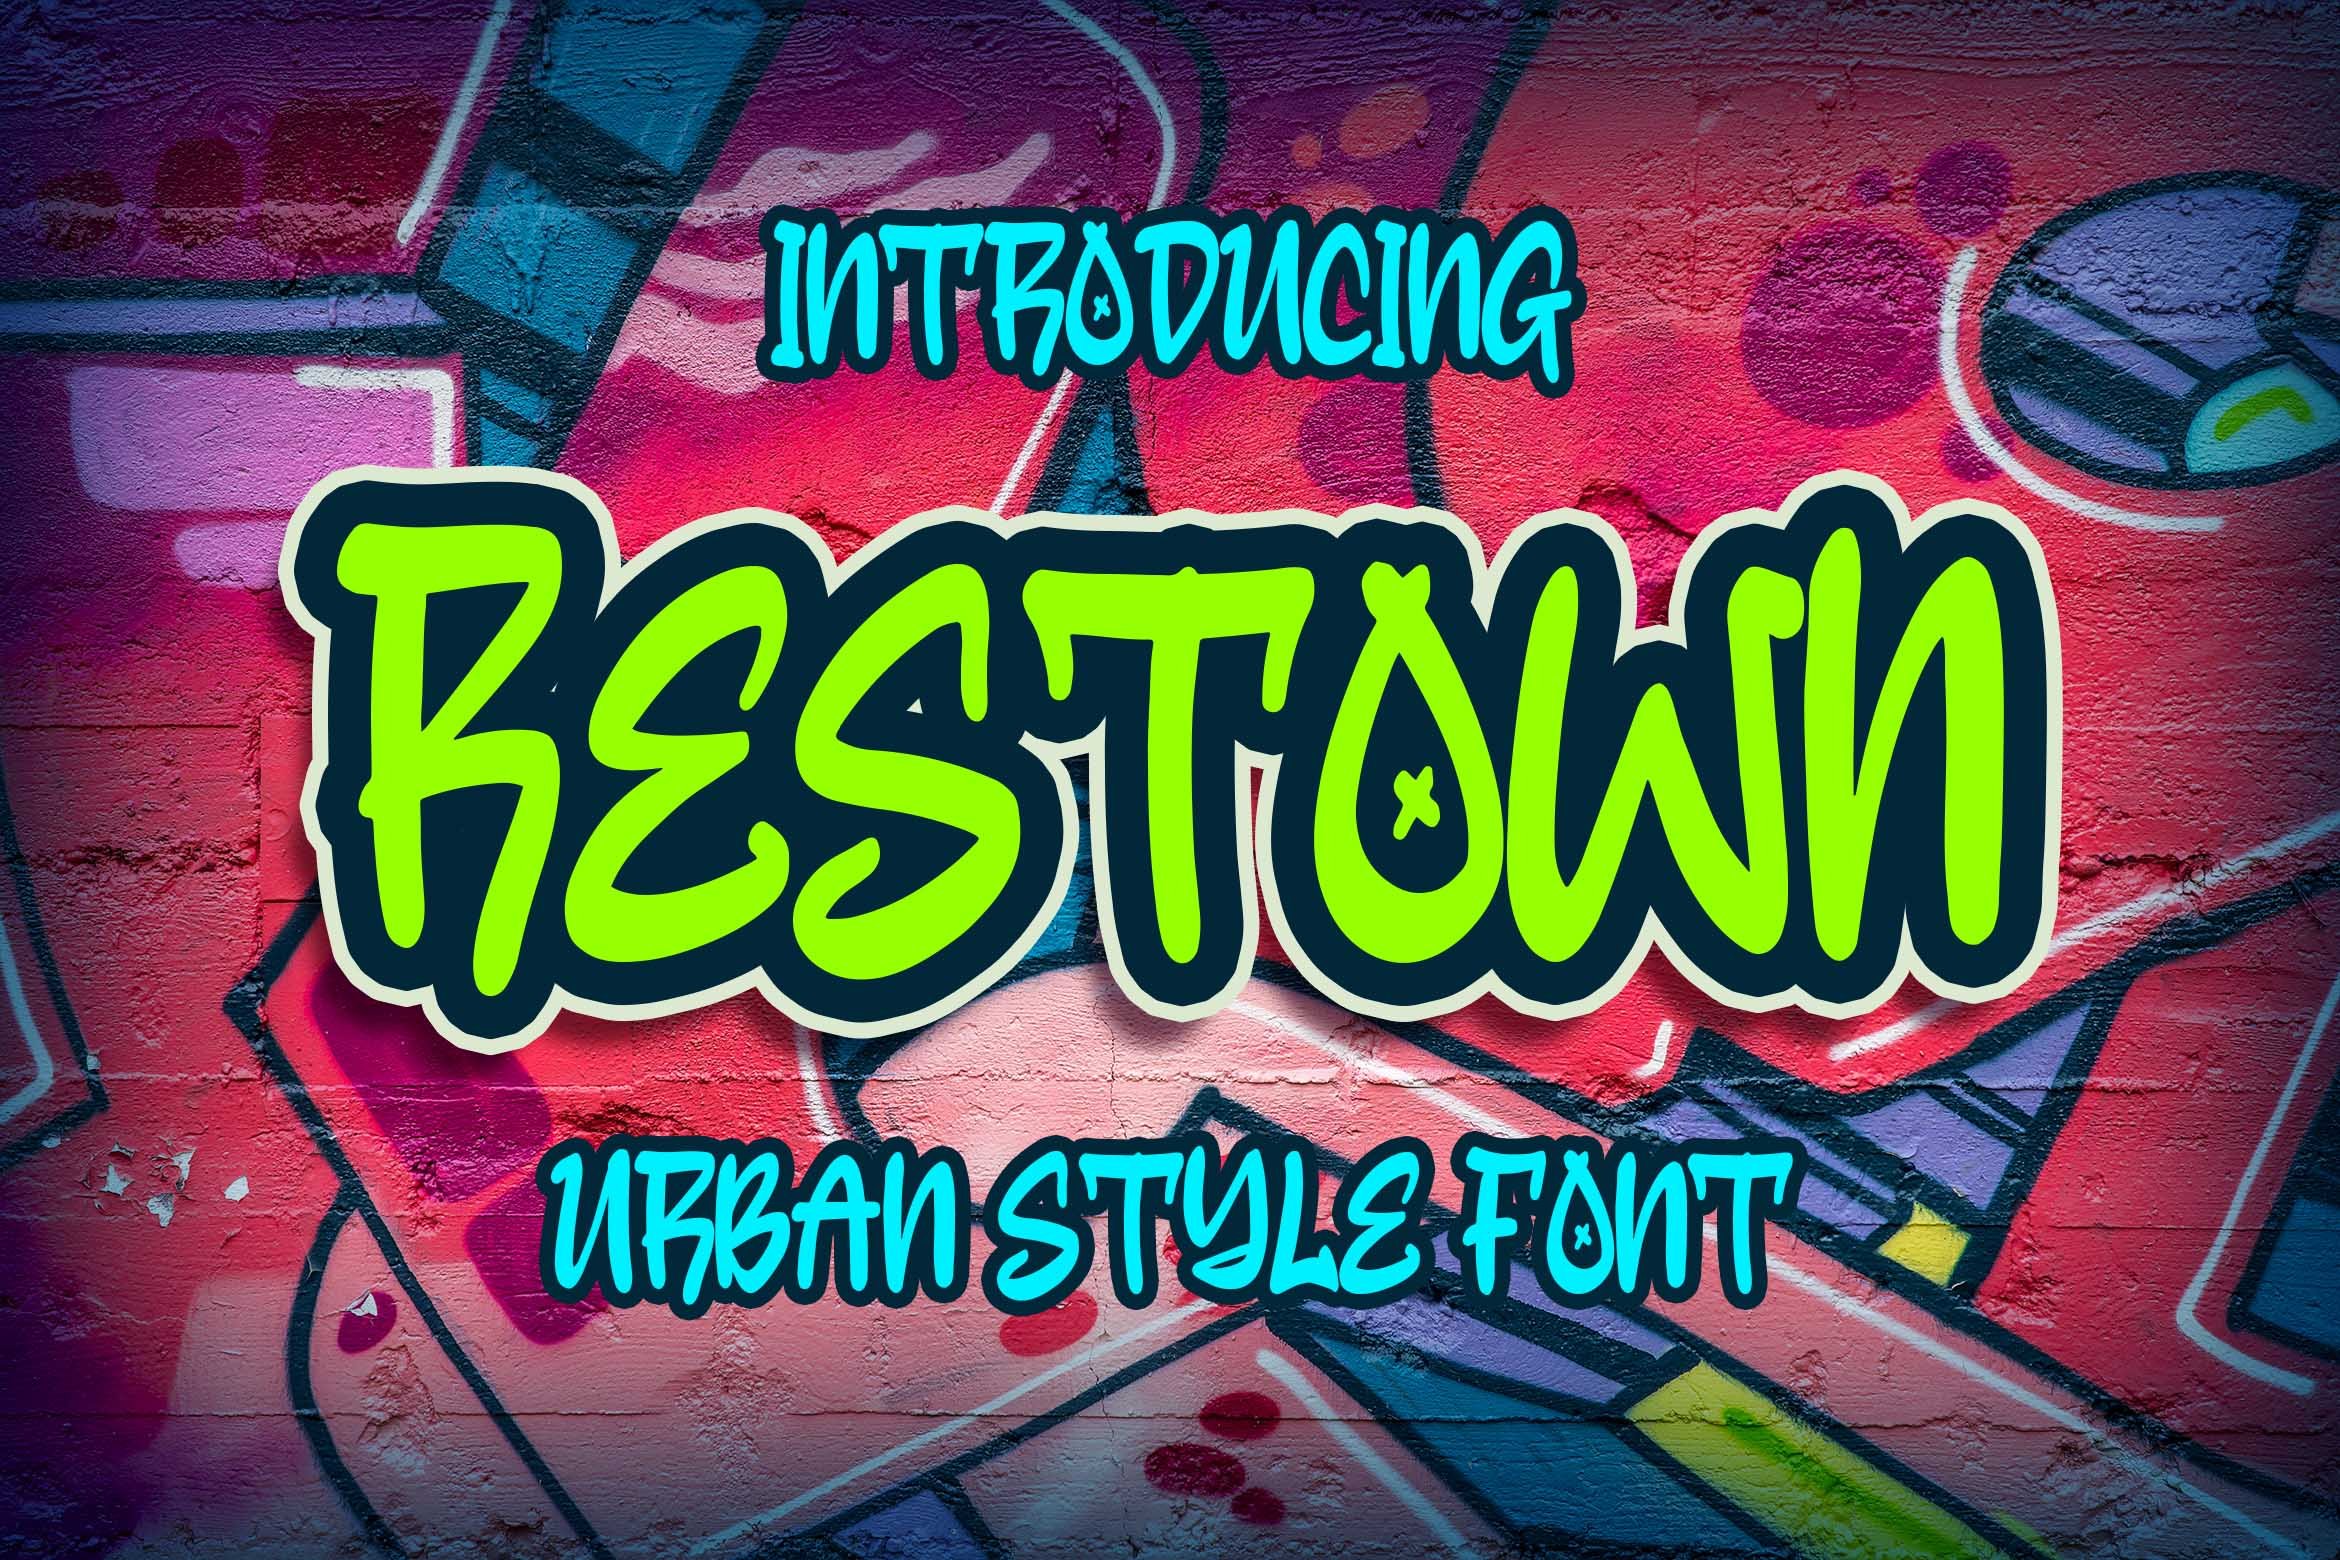 Restown - Urban Style Font cover image.